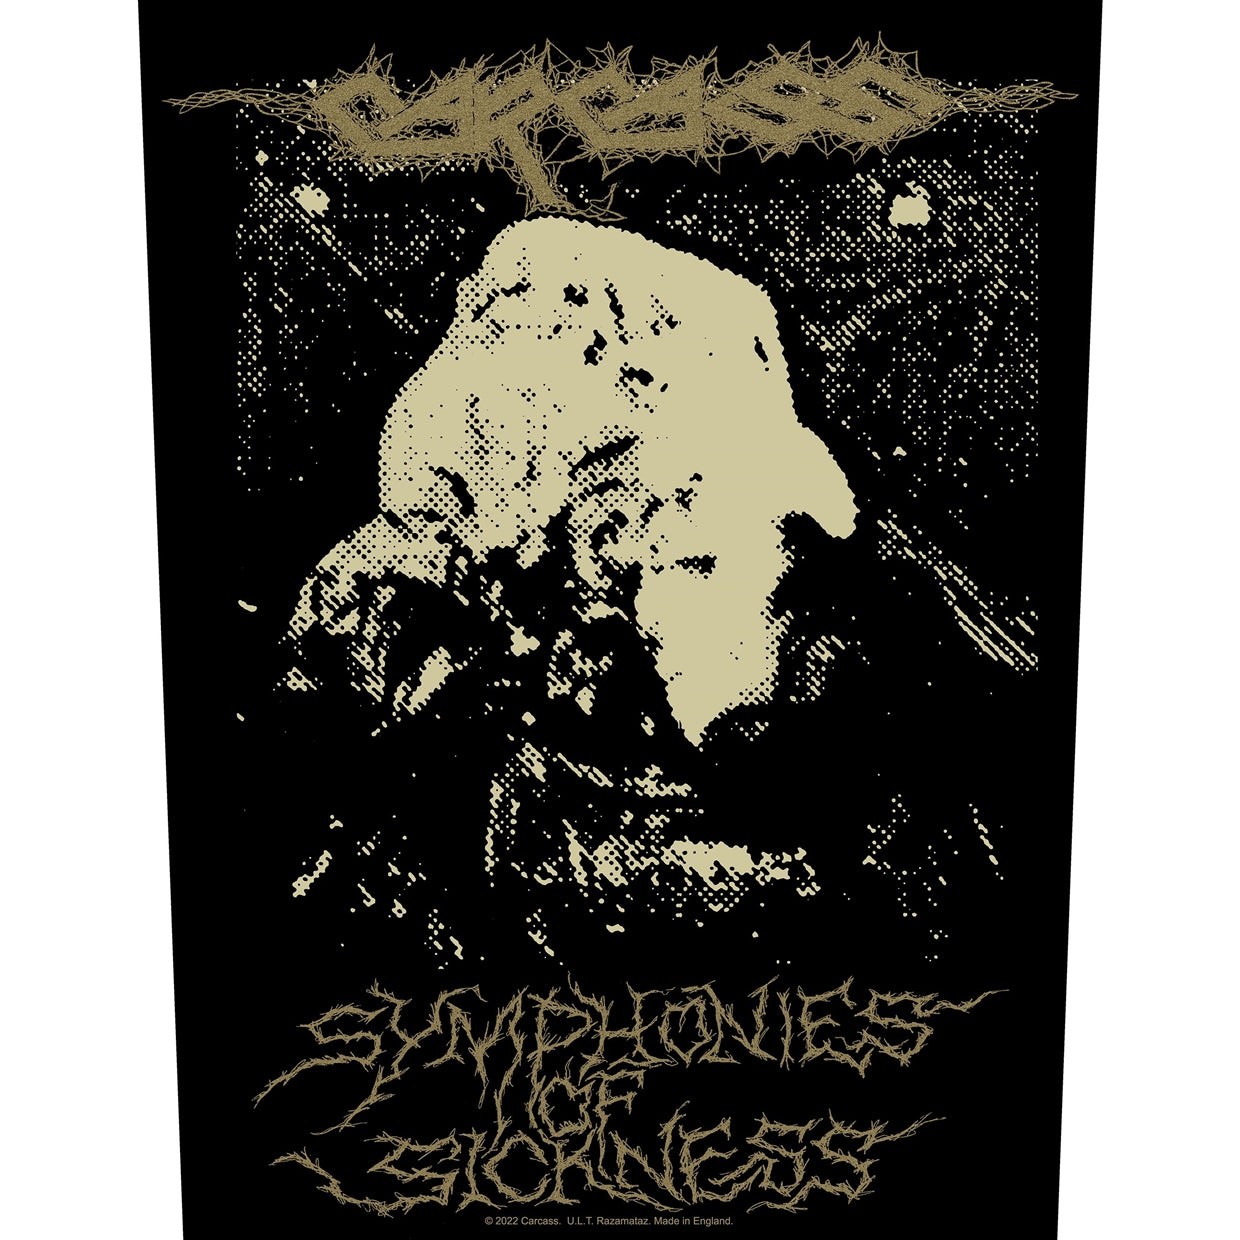 Carcass "Symphonies Of Sickness" Back Patch